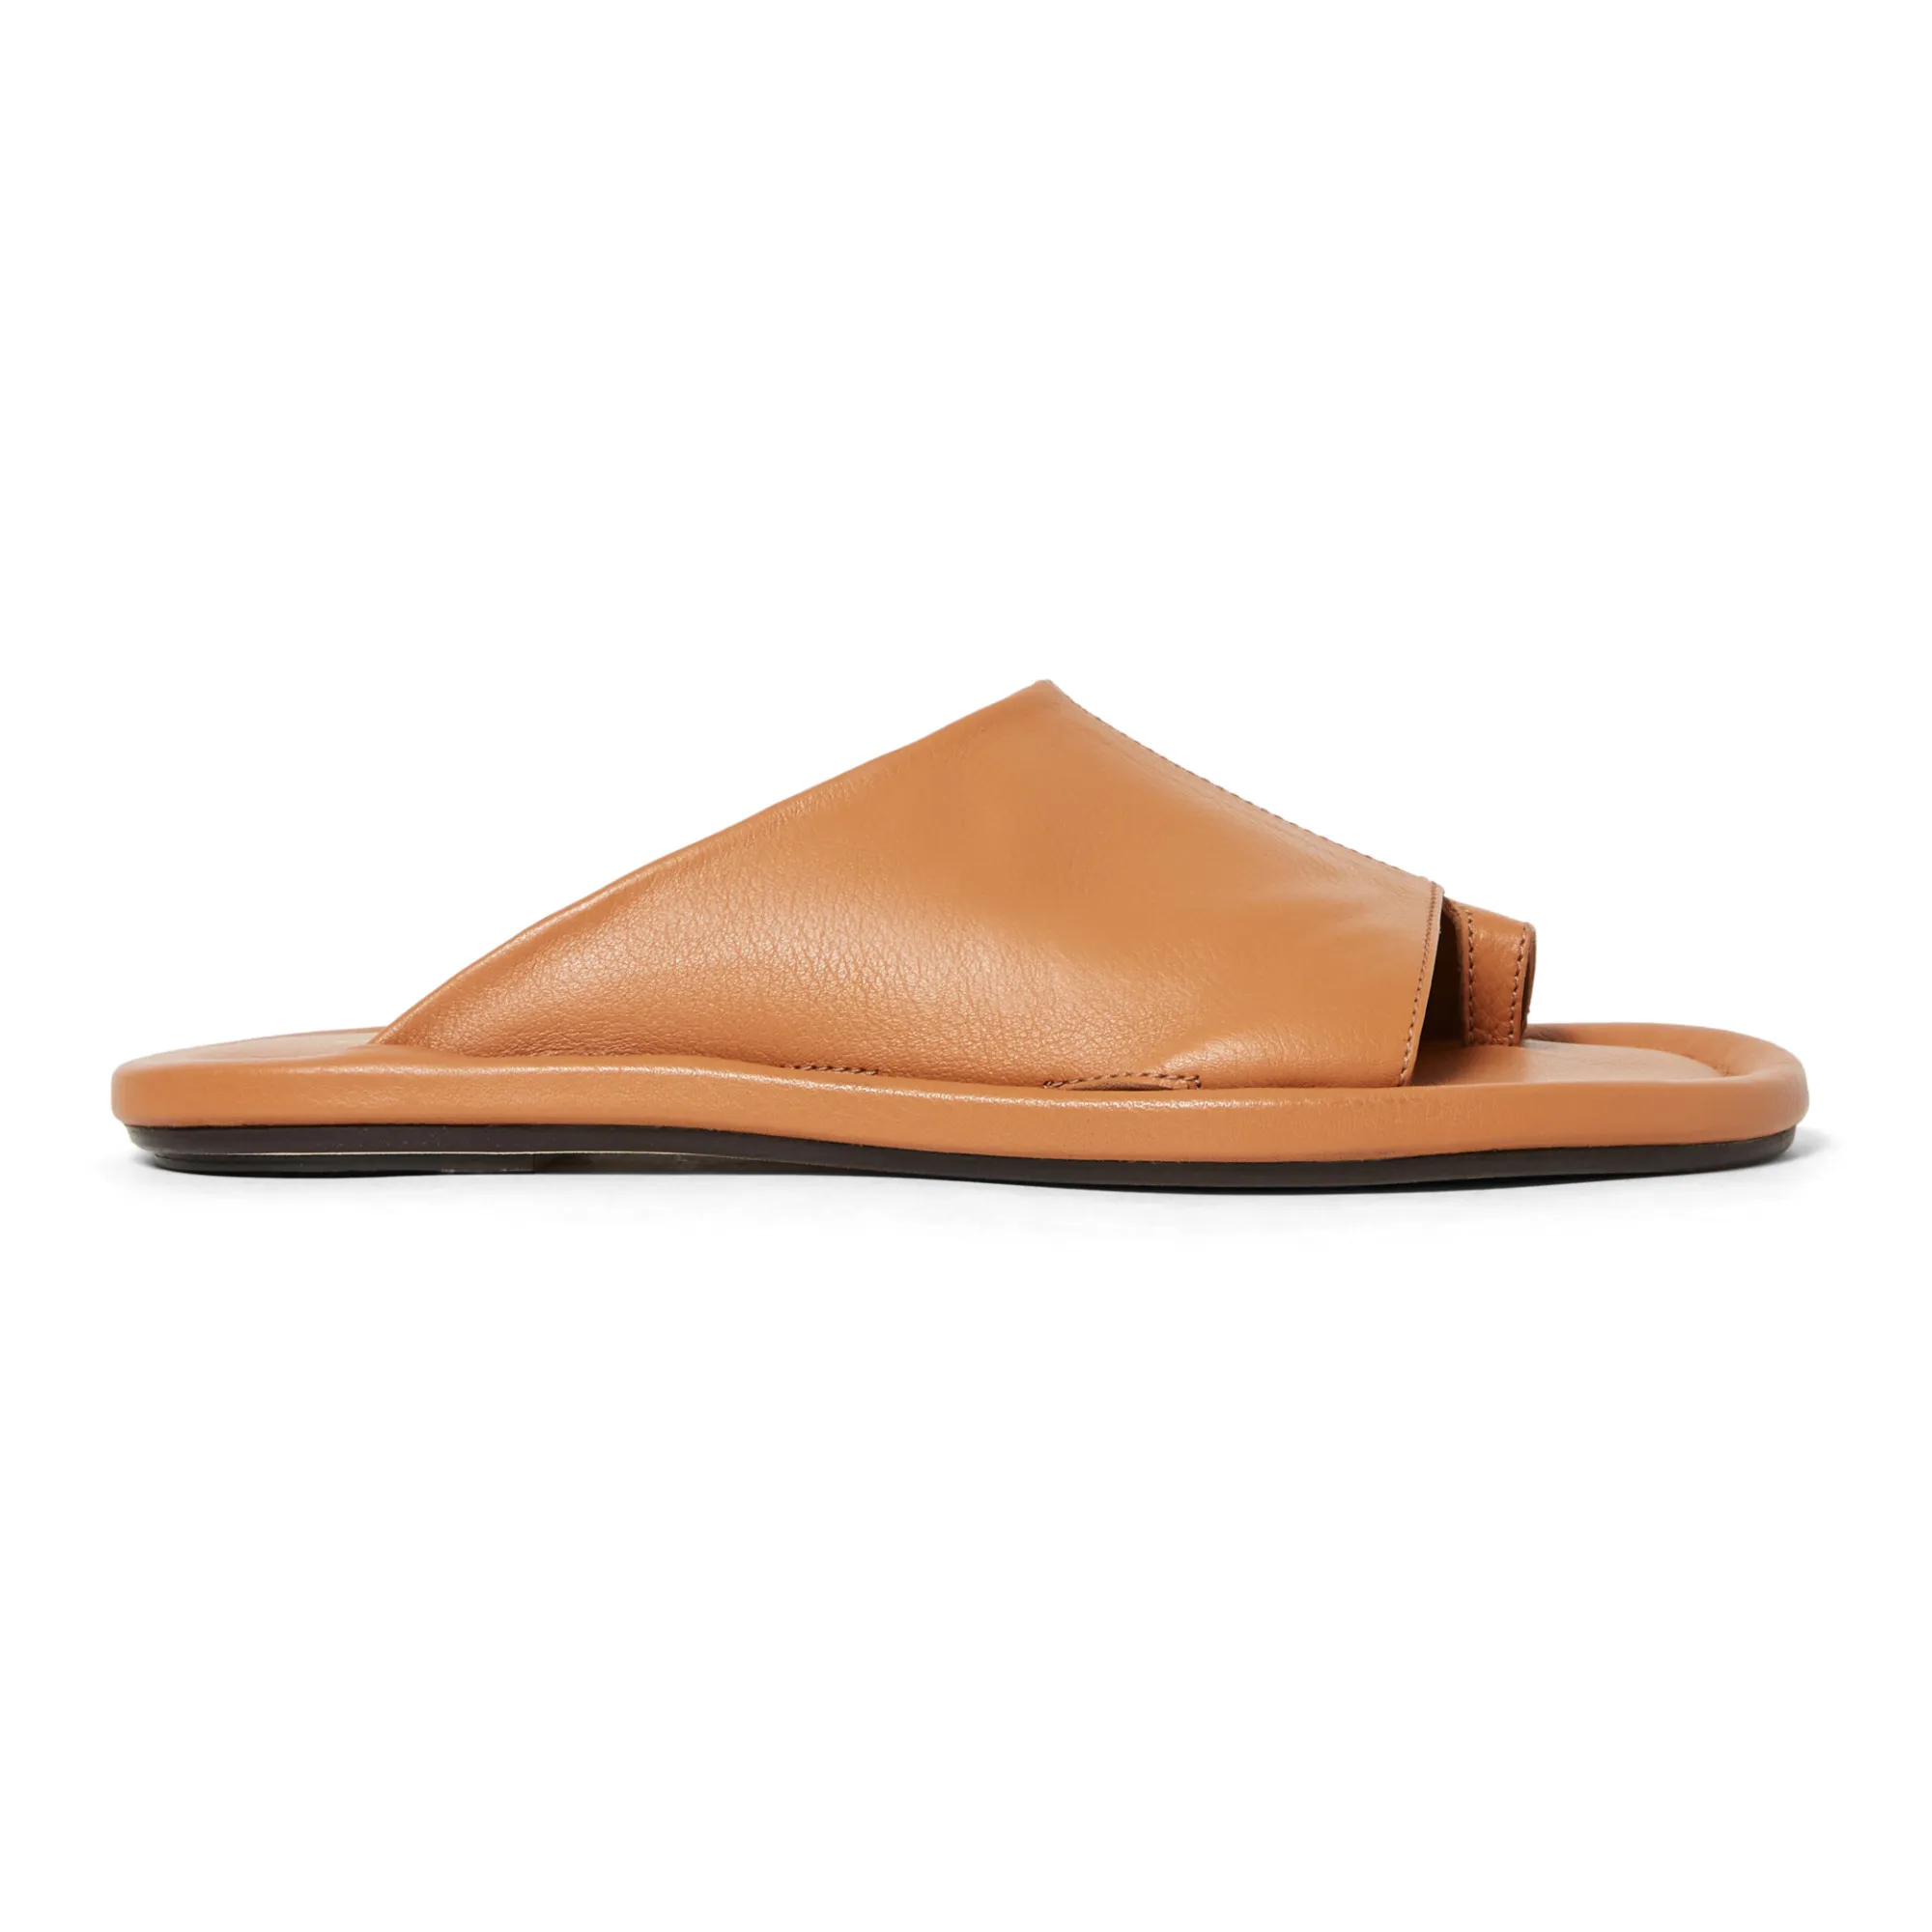 5mm Flat Leather Mules